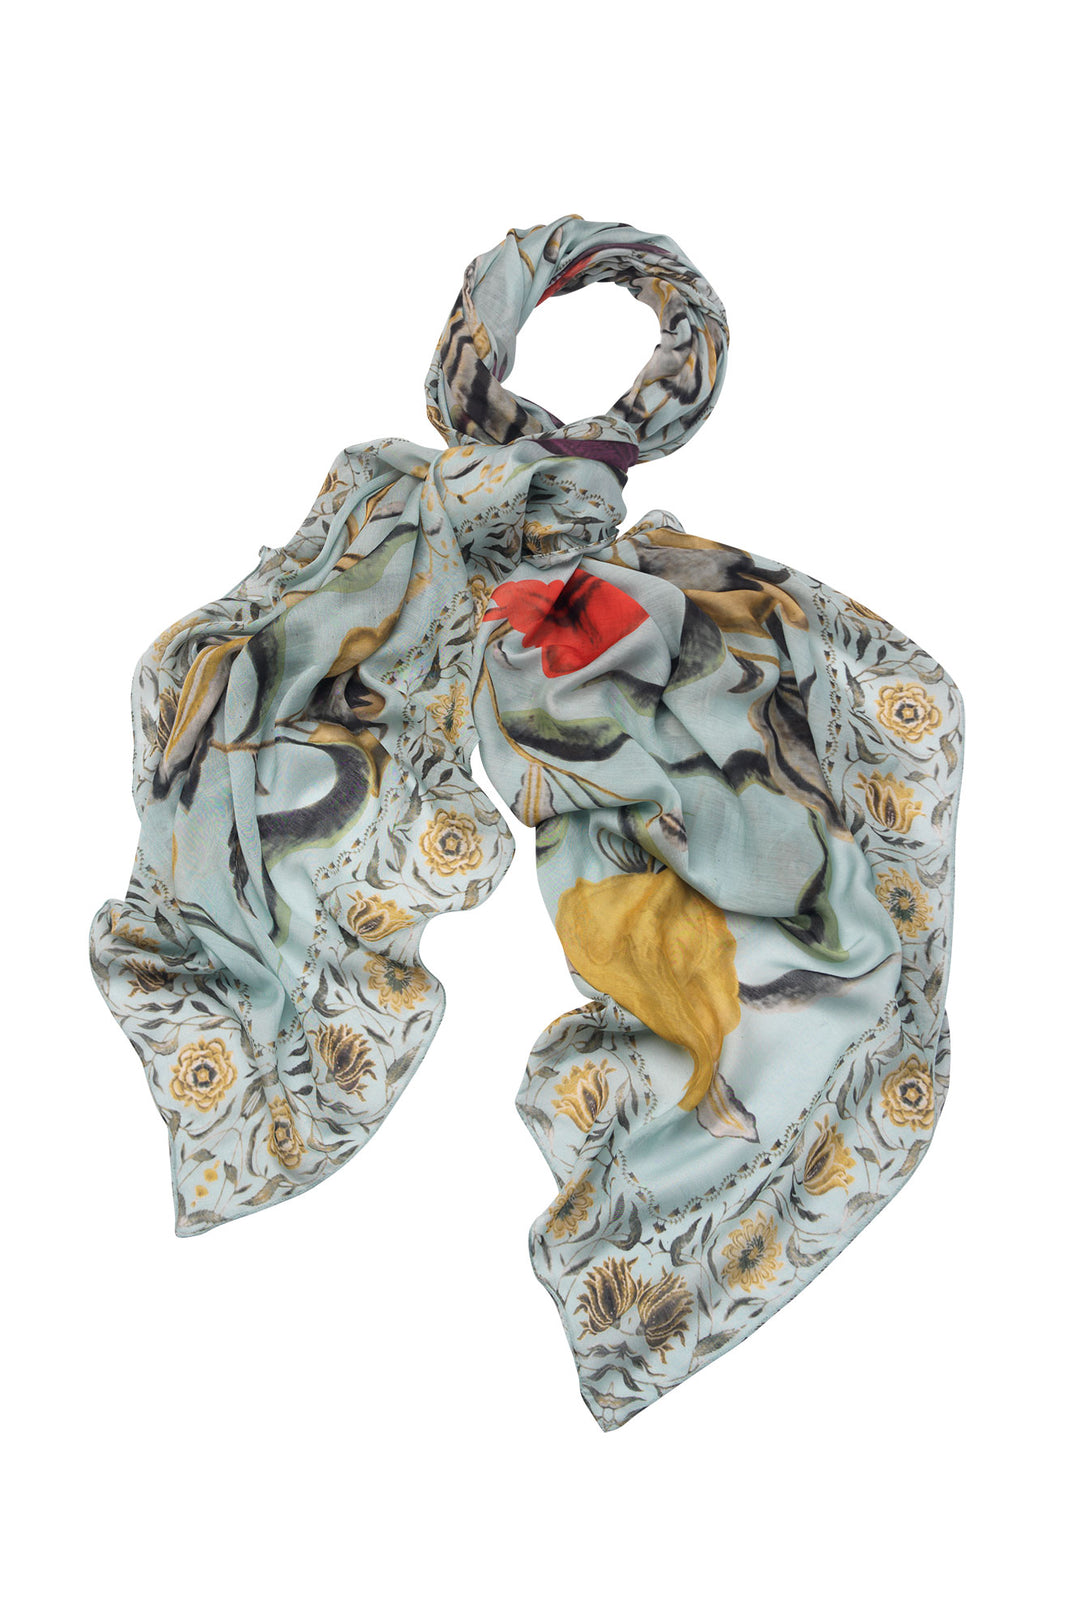 Women's accessories, gifts for her. Large scarf in aqua with floral joy print by One Hundred Stars